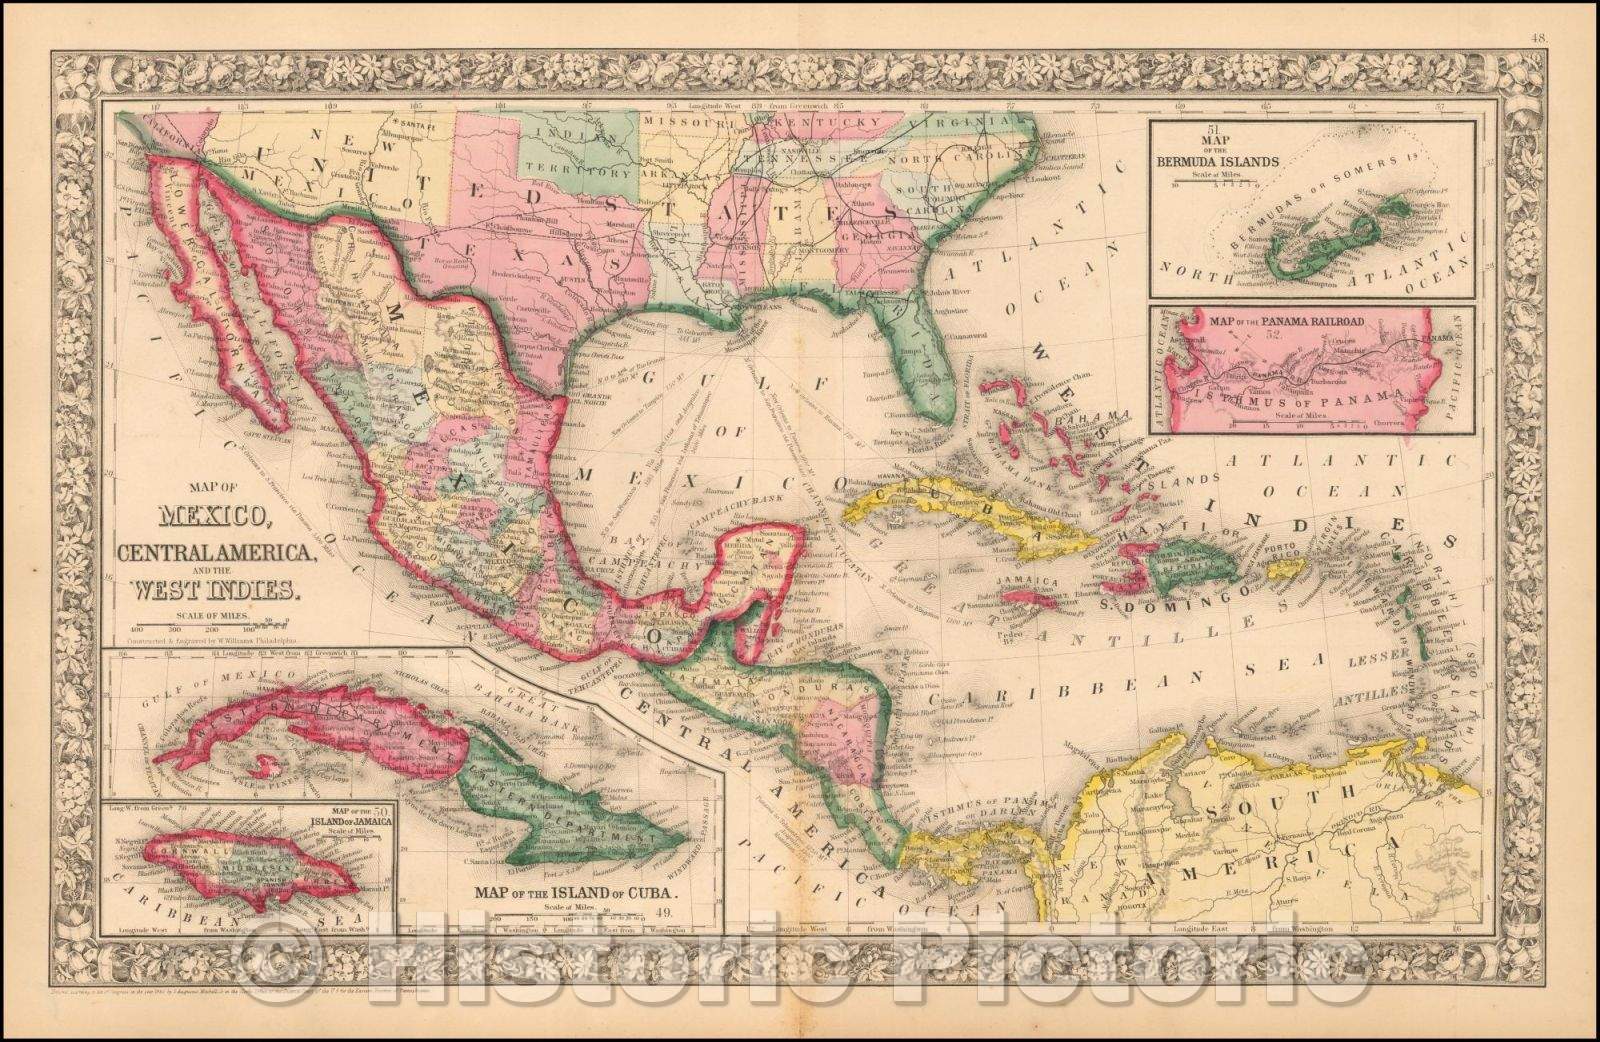 Historic Map - Map of Mexico, Central America, and the West Indies [Insets of Bermuda, Cuba, Jamaica and Panama Railroad], 1852, Samuel Augustus Mitchell Jr. - Vintage Wall Art